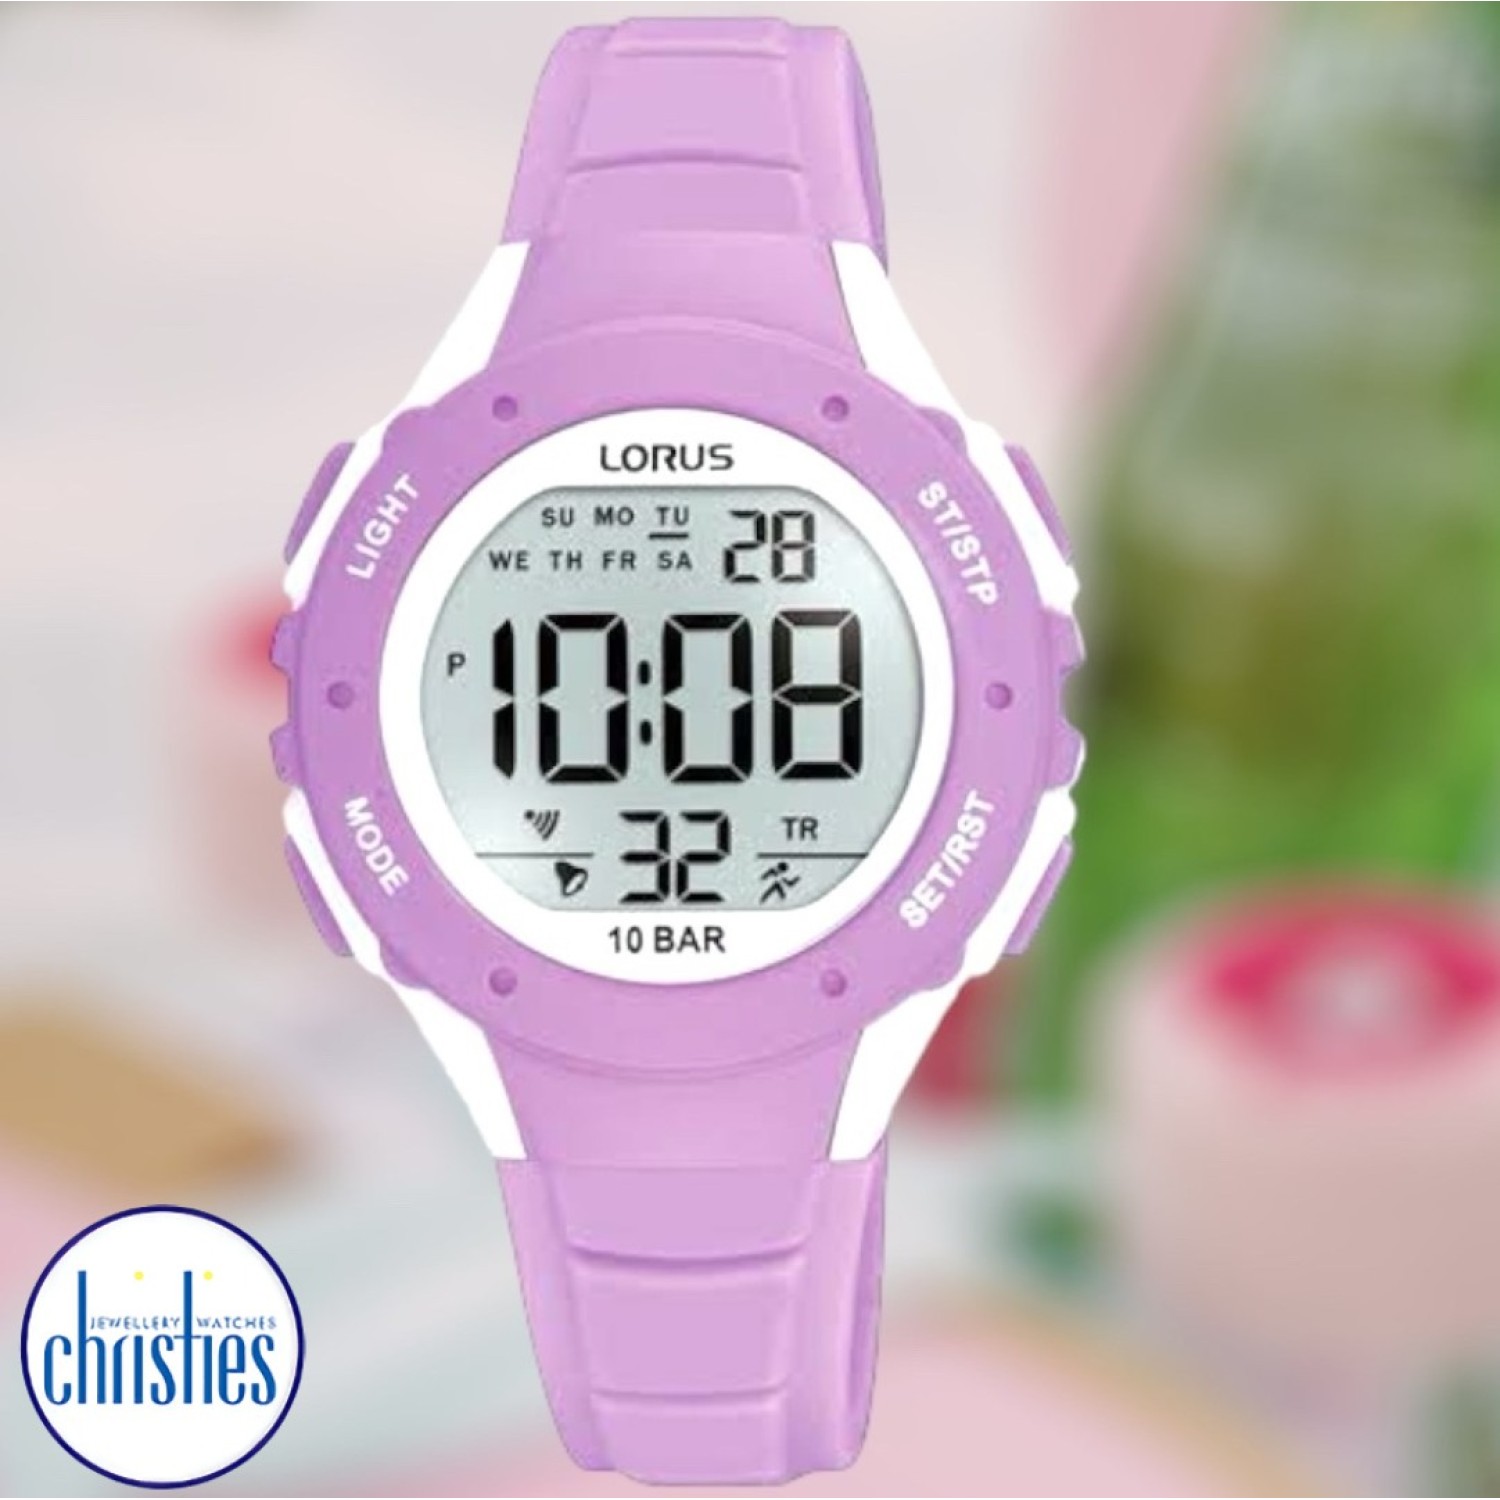 R2369PX-9 Lorus Multi-Timer Watch R2363PX9 Lorus by Seiko Auckland s offers a diverse range of watch styles, including analog, digital, sports, and dress watches